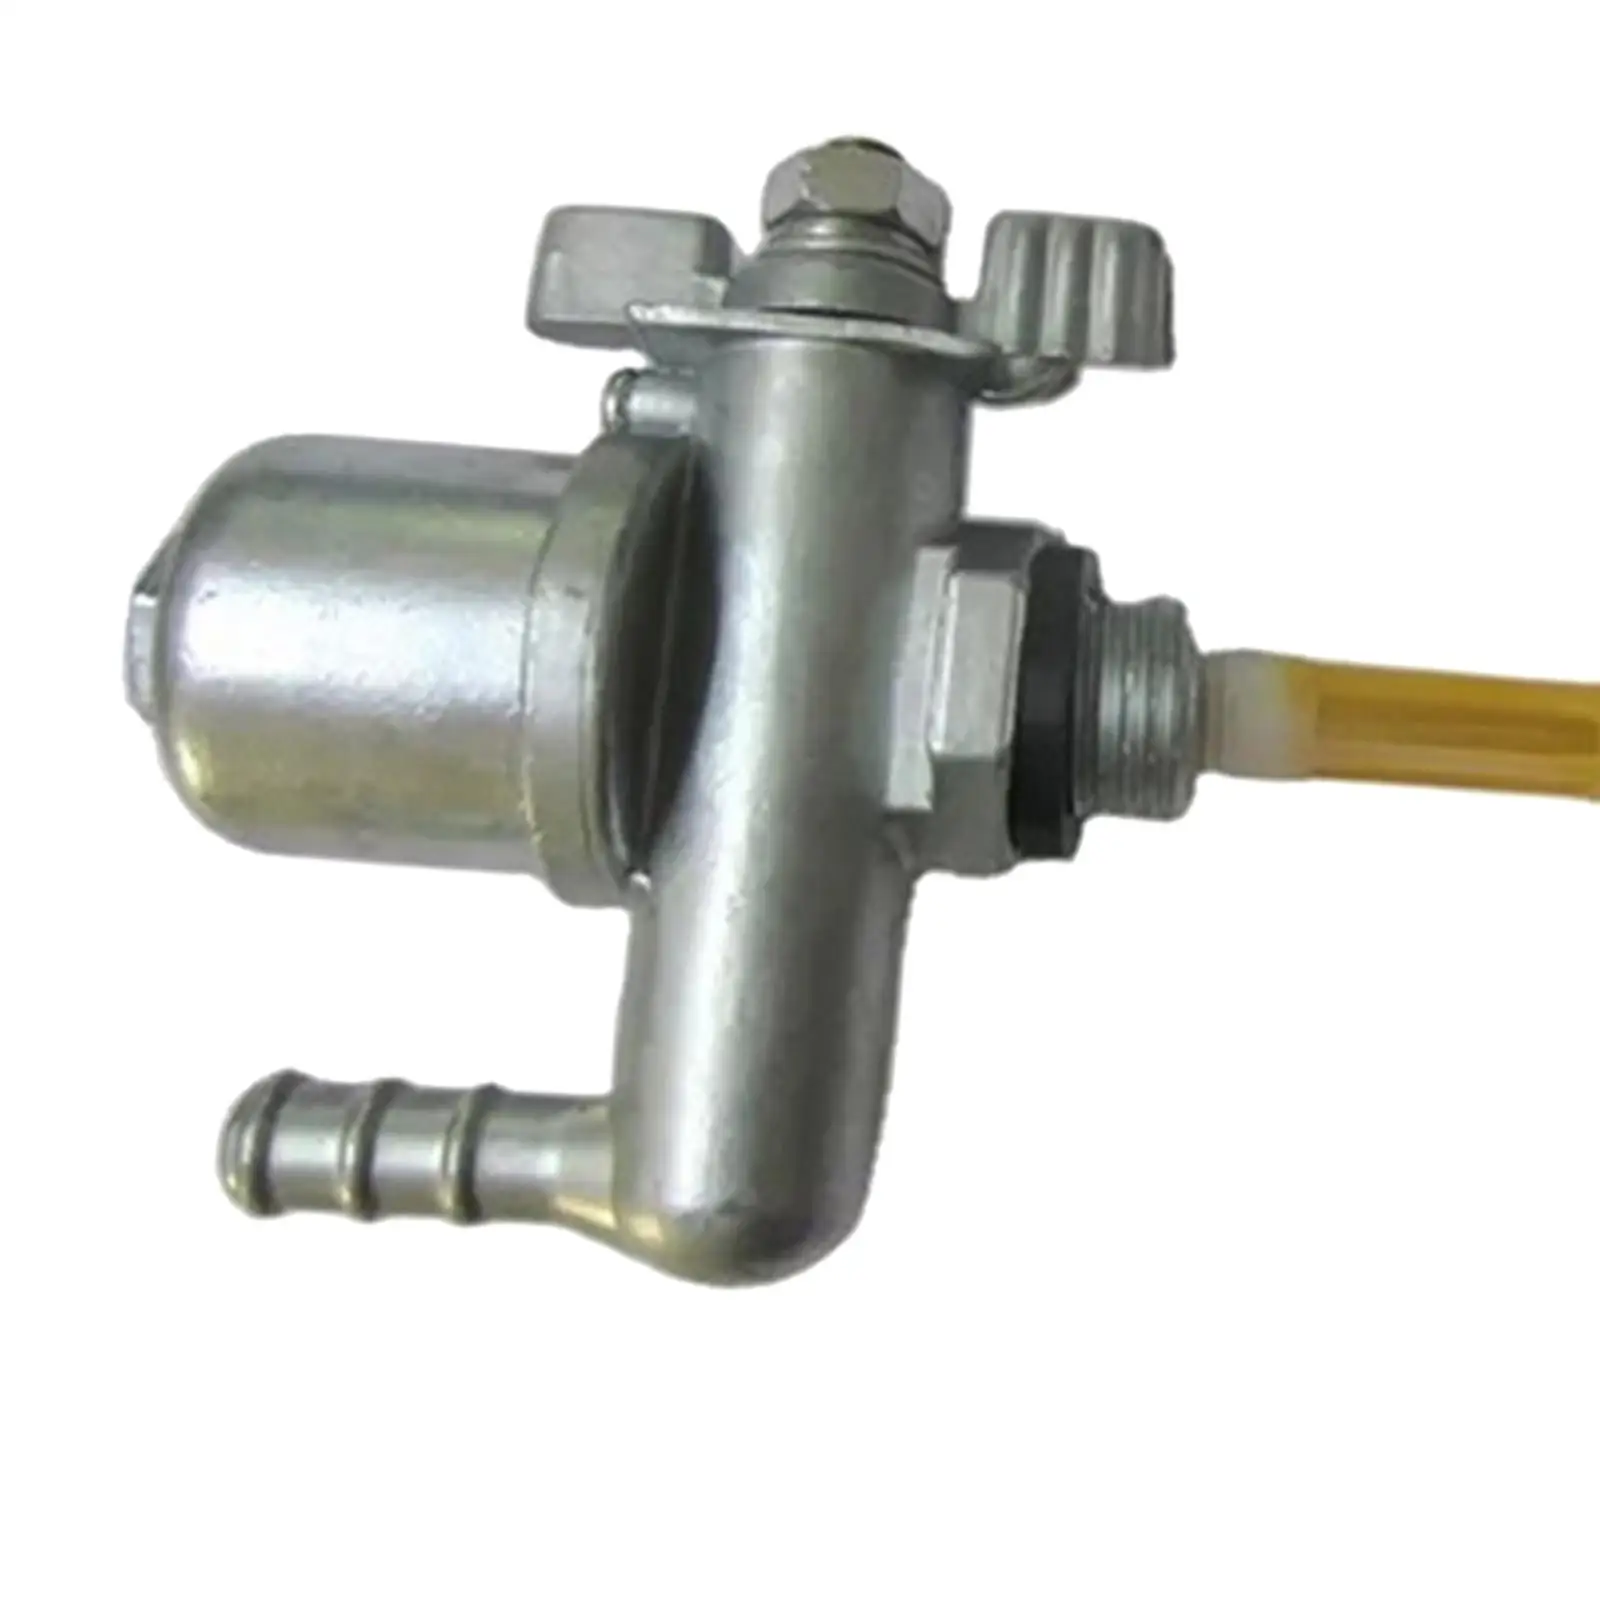 Motorcycle Gas Fuel Switch Pump Valve Petcock Replace for Ruassia Msk Motorcycle